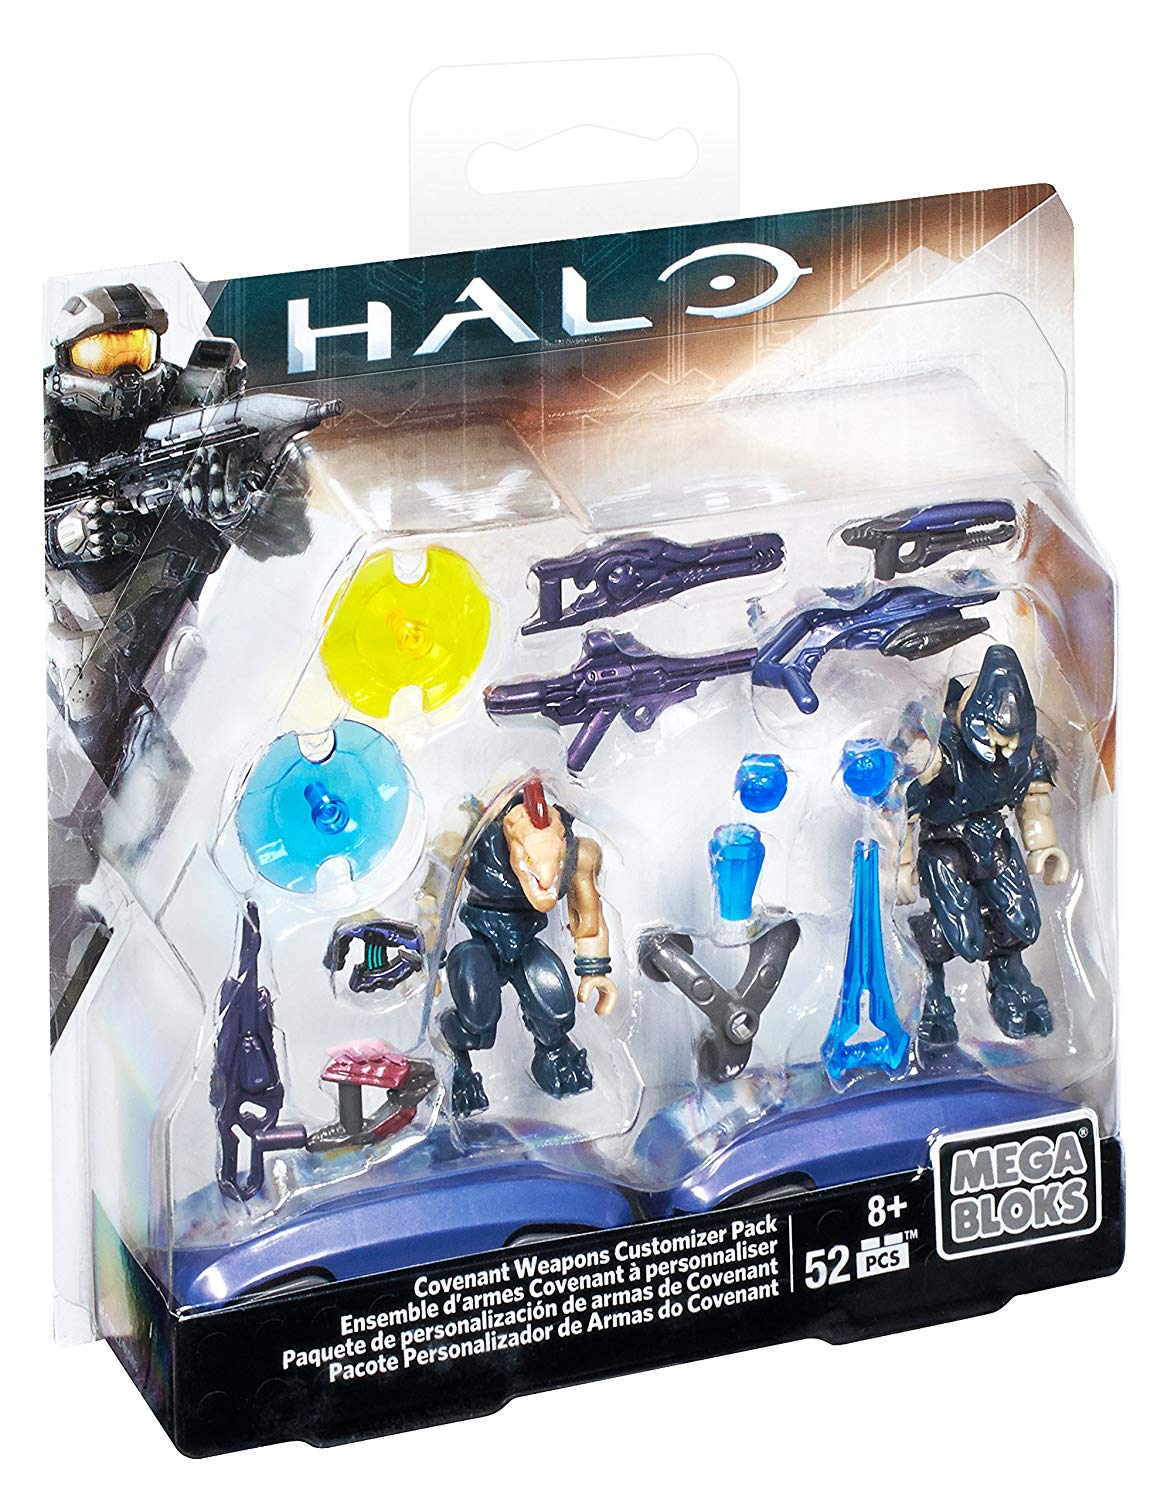 Mega Construx Halo Covenant Weapons Customizer Pack